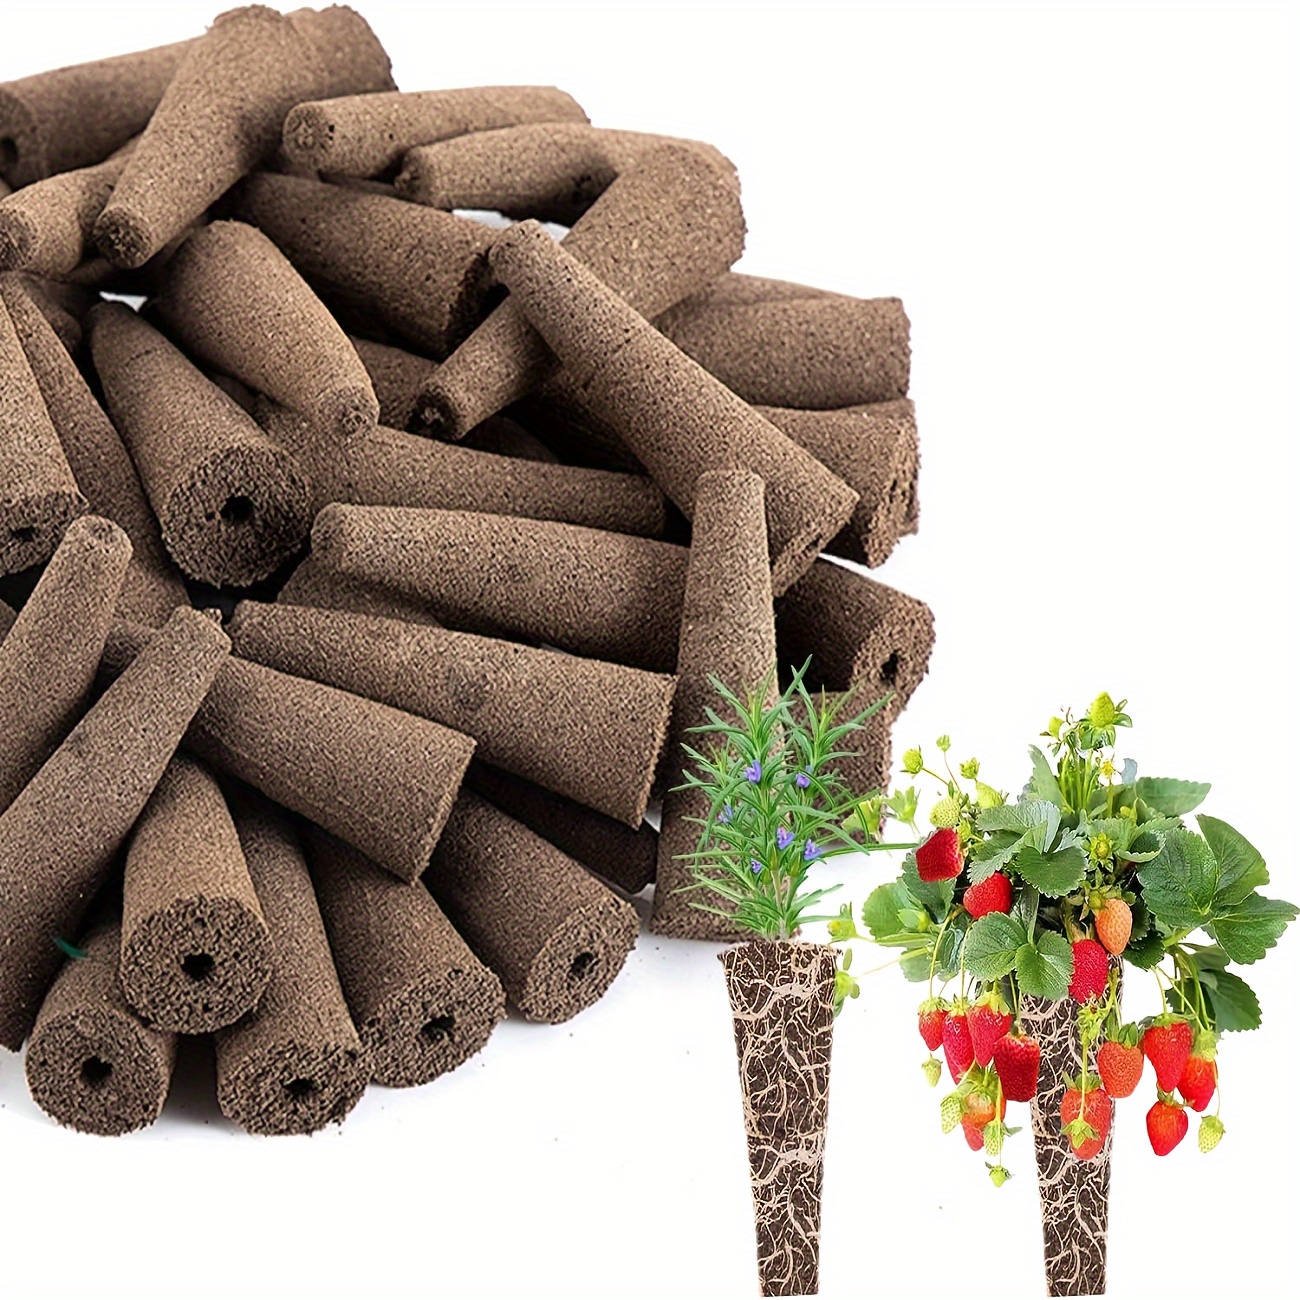 

50pcs, Grow Sponges, Replacement Seed Pods Root Growth Sponges, Refill Starter Pods, High Germination Rate For Hydroponic Plants Growth